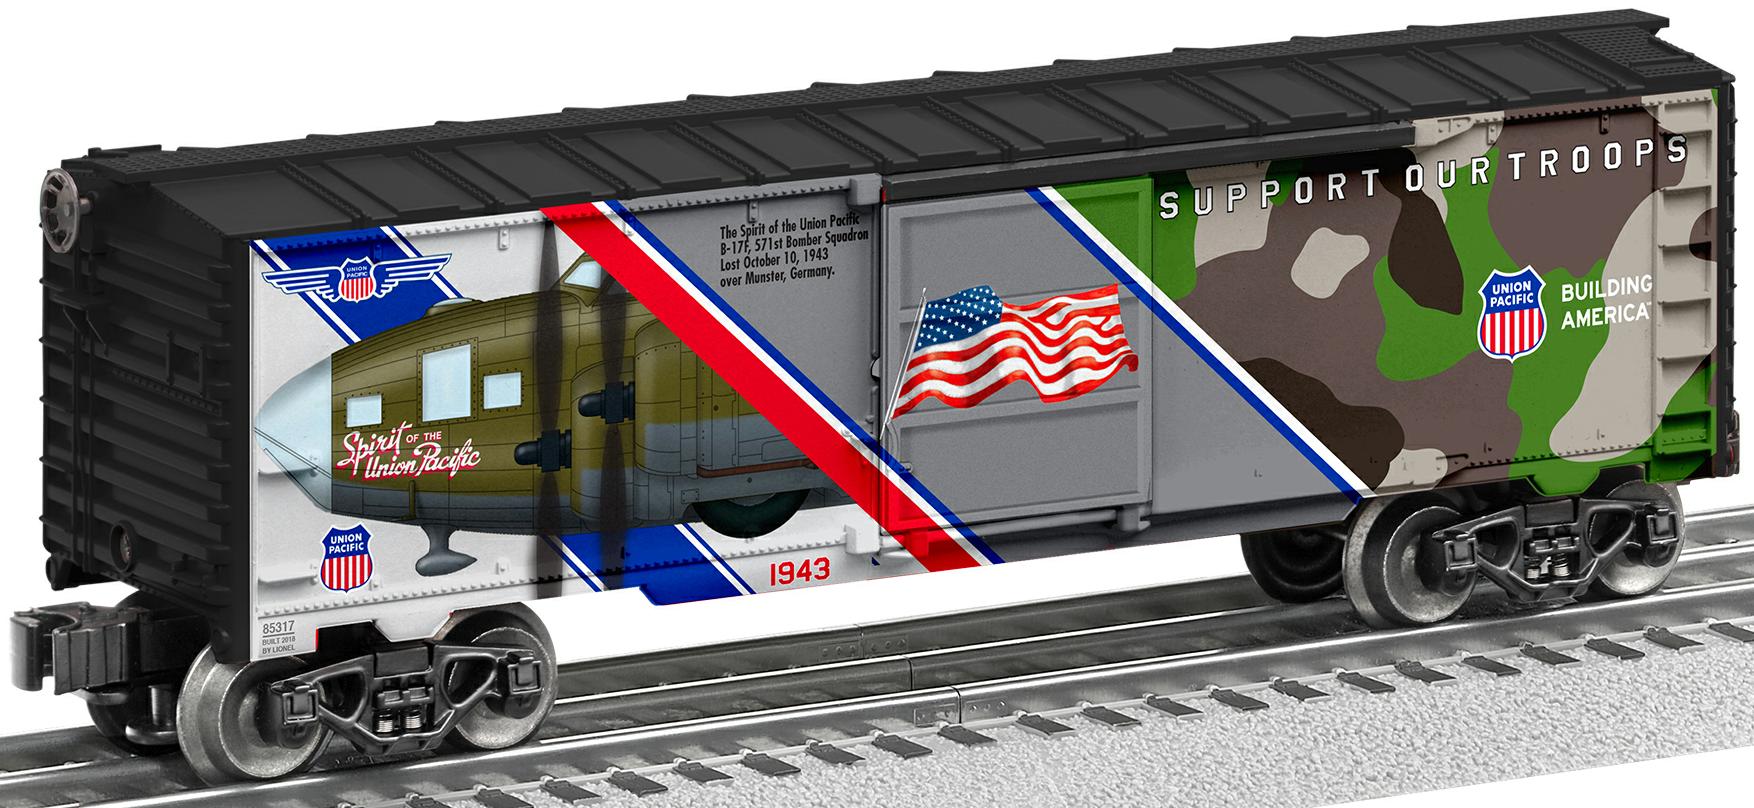 Spirit of the Union Pacific Boxcar image